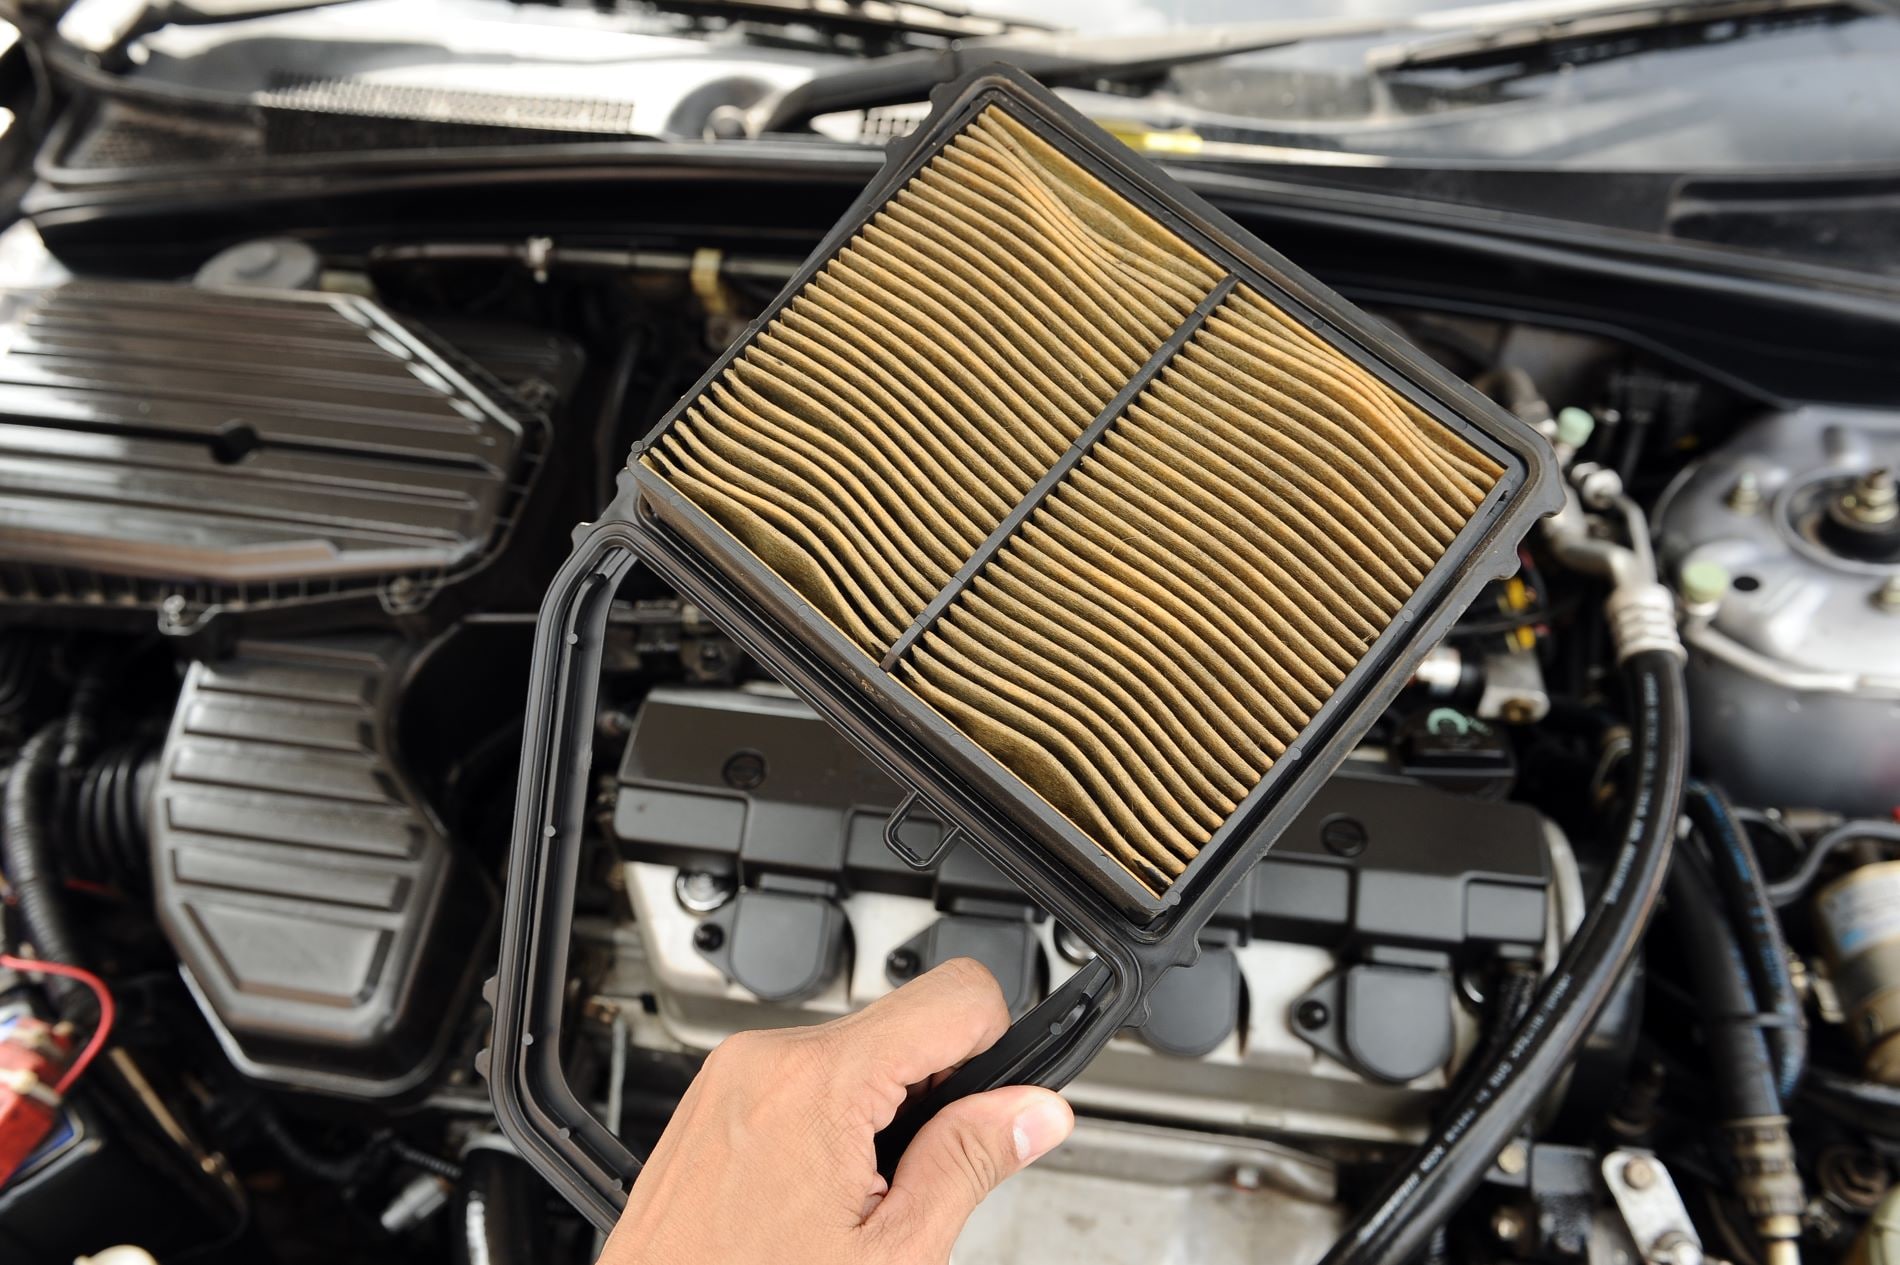 Engine Air Filters, once you remove the dirty air filter you must install the new filter quickly into the filter box. Dirty Car Air Filter.